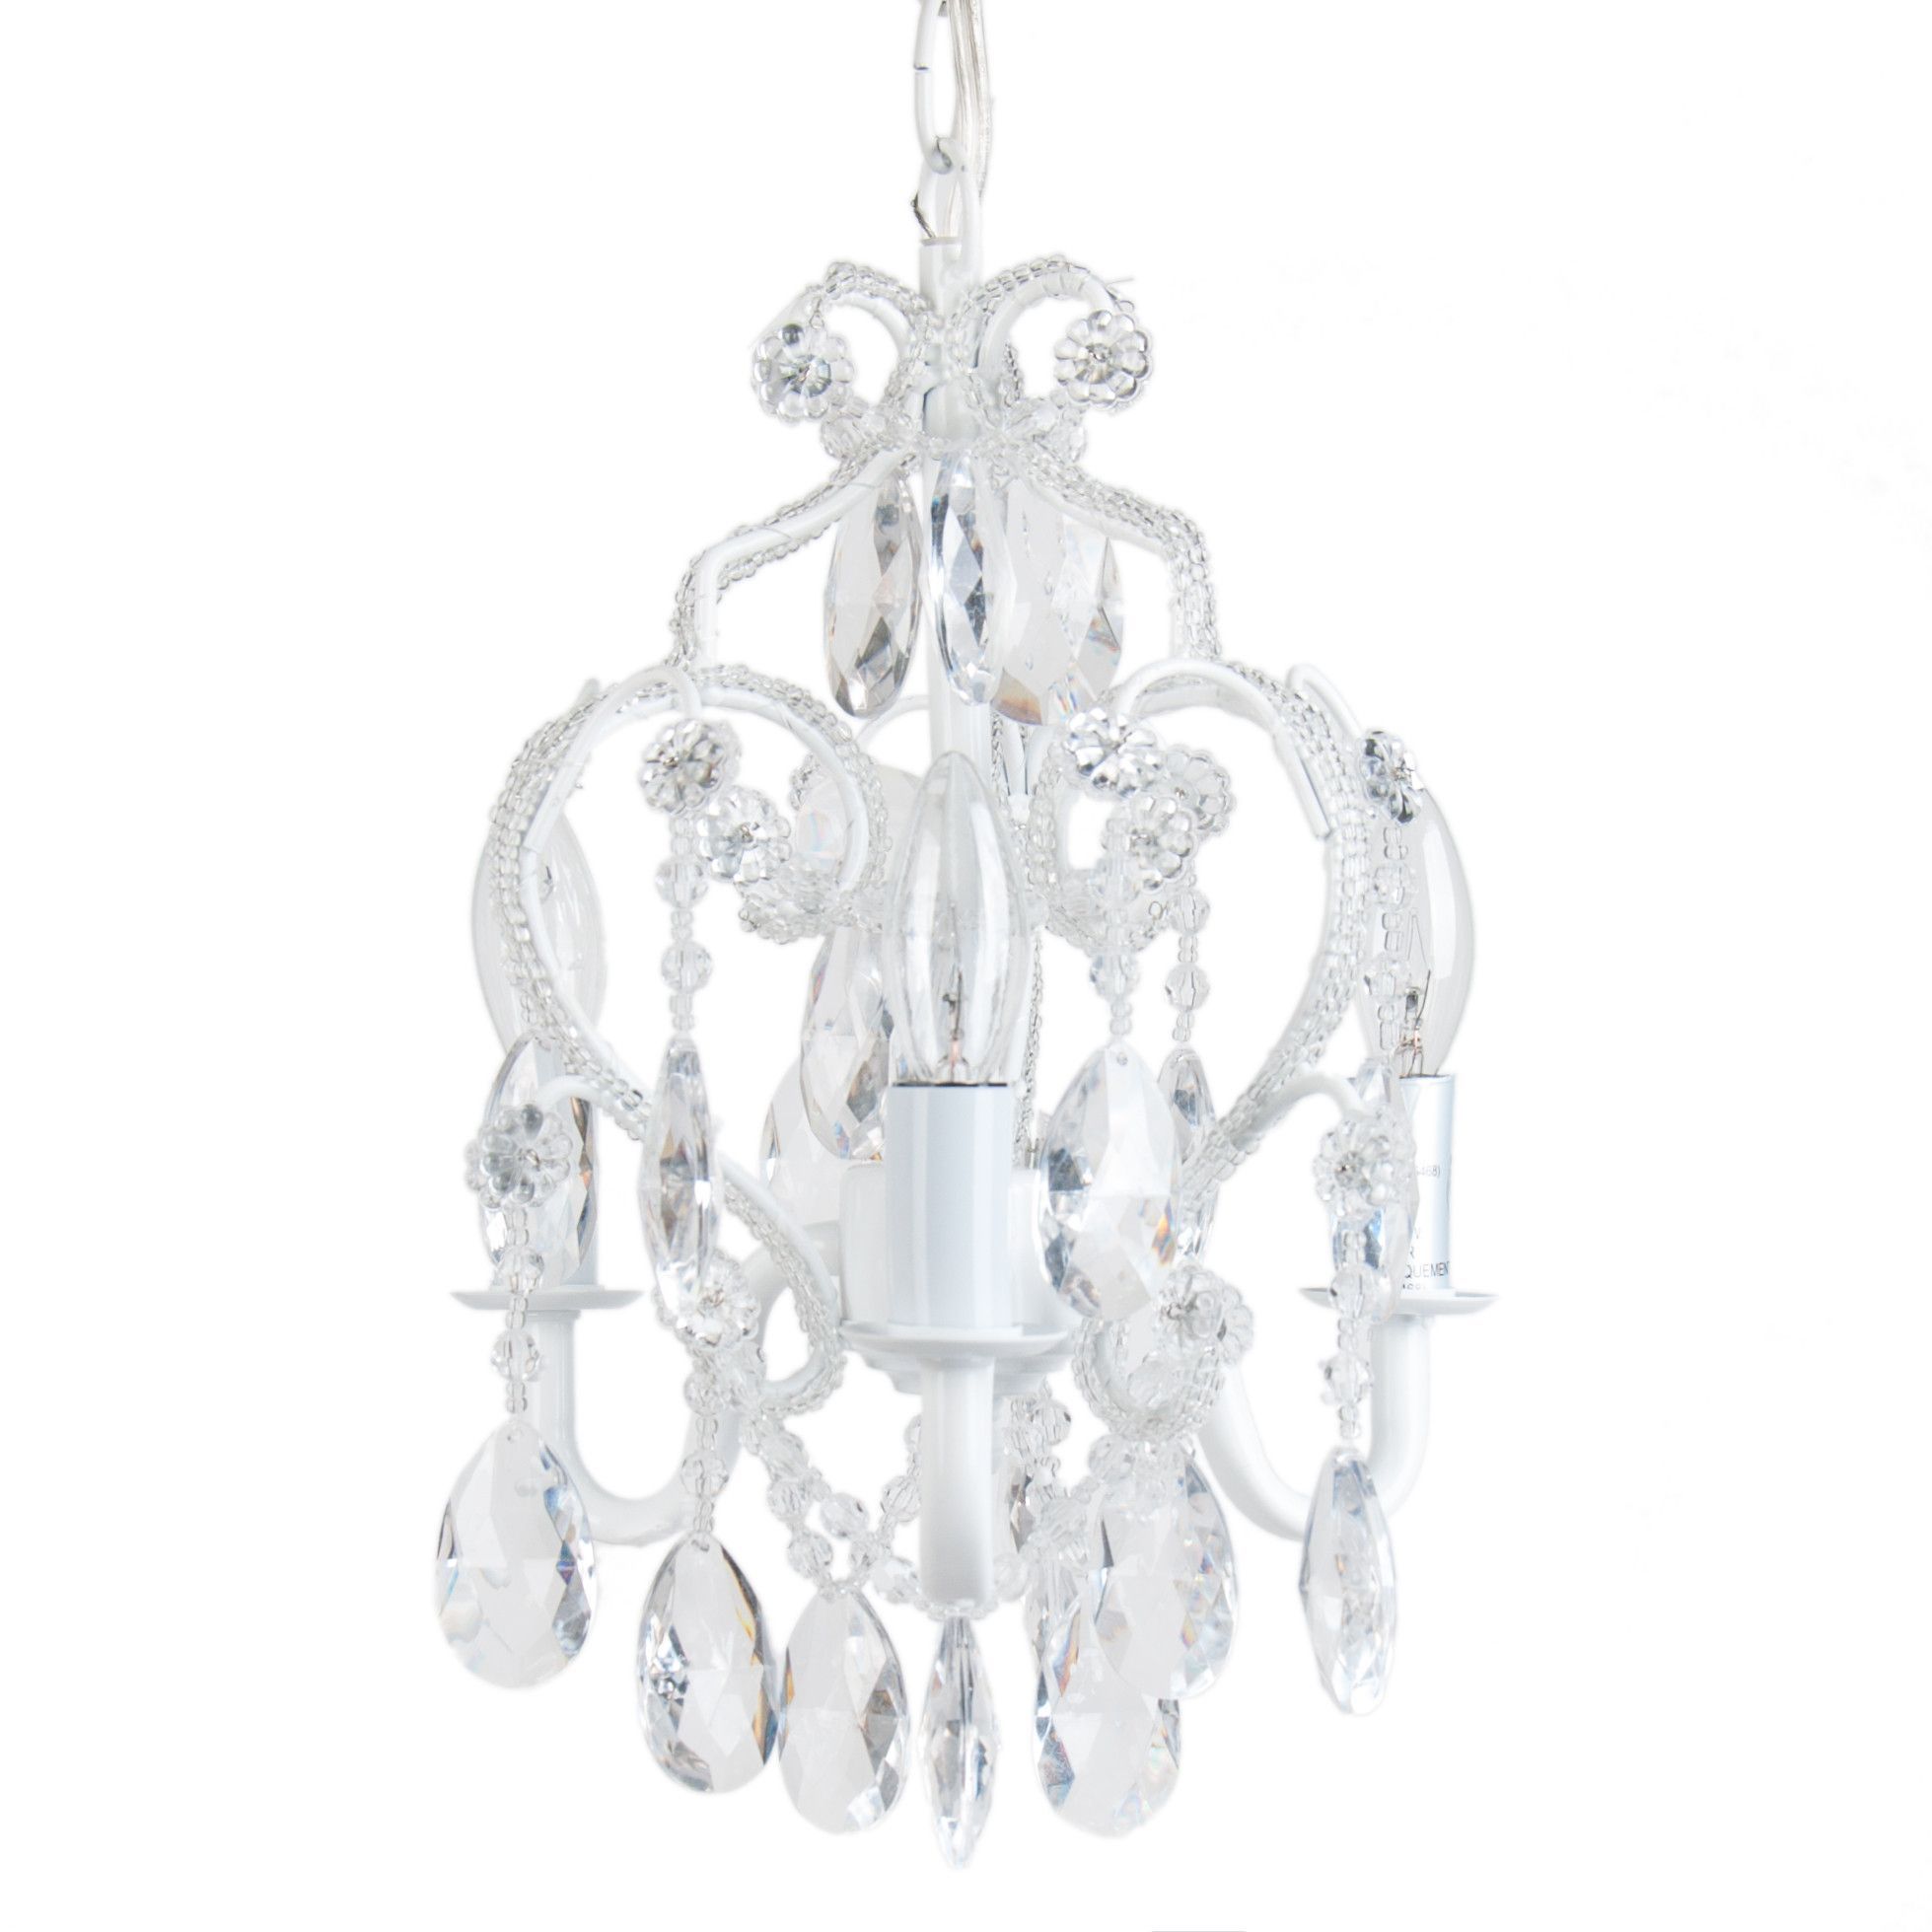 3 Bulb Vintage Mini Chandelier | Lightinh | Chandelier In Aldora 4 Light Candle Style Chandeliers (View 16 of 30)